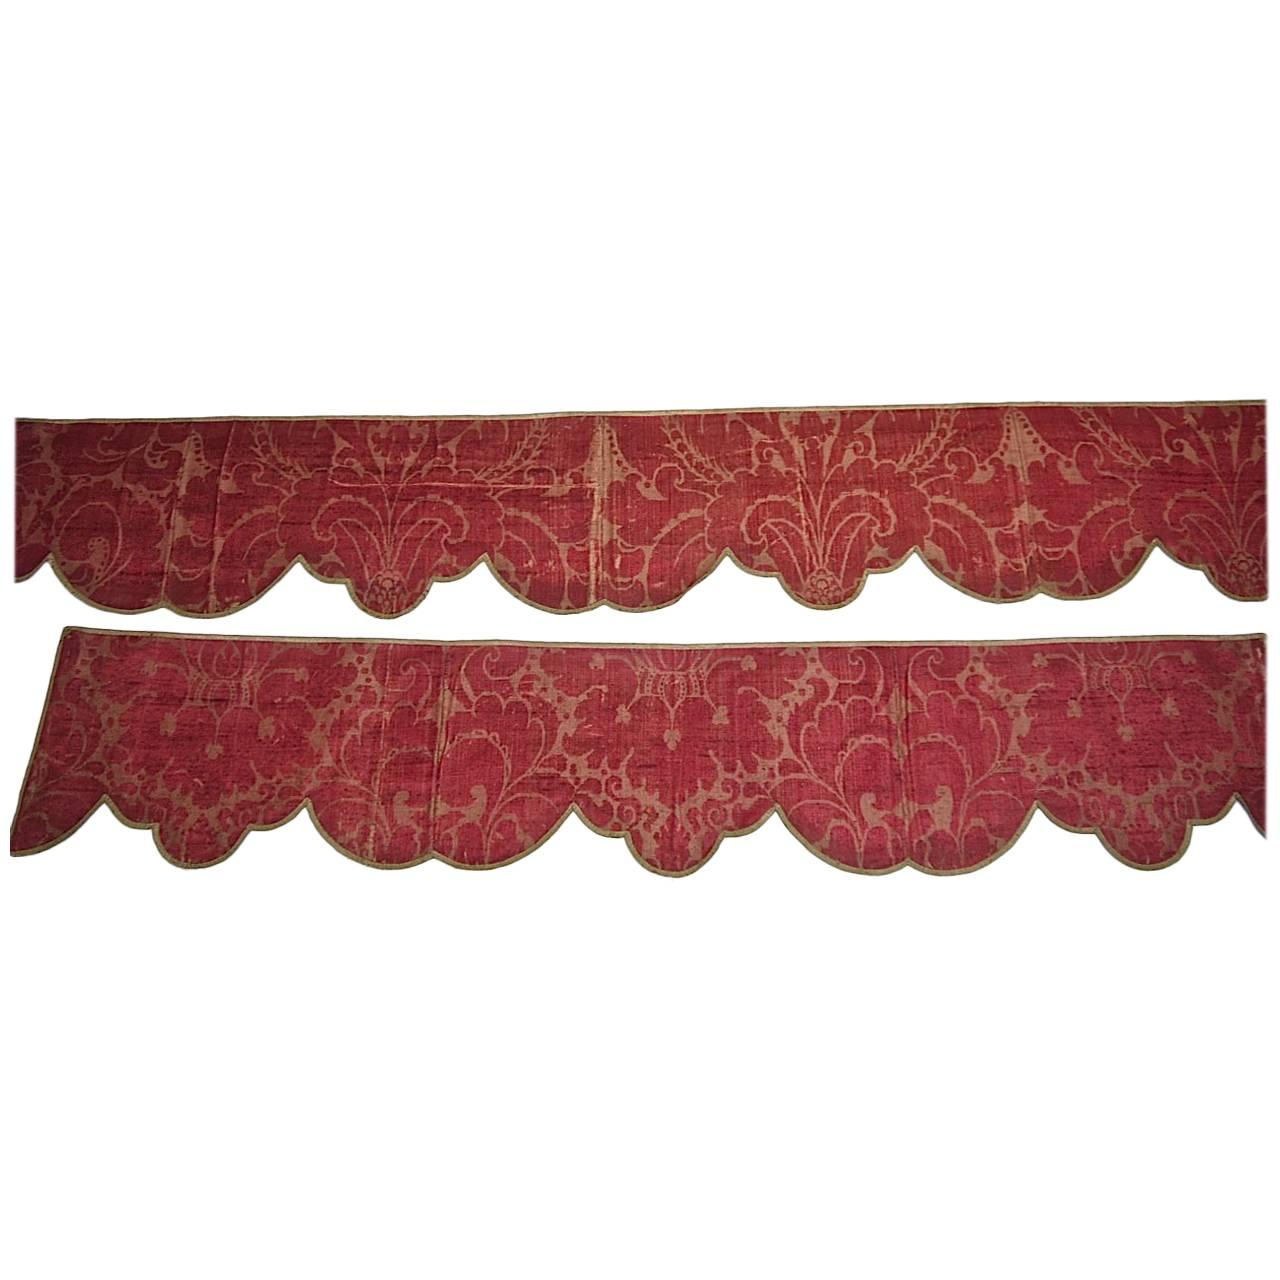 Pair of Silk Damask Scalloped Edged Pelmets French 18th century For Sale